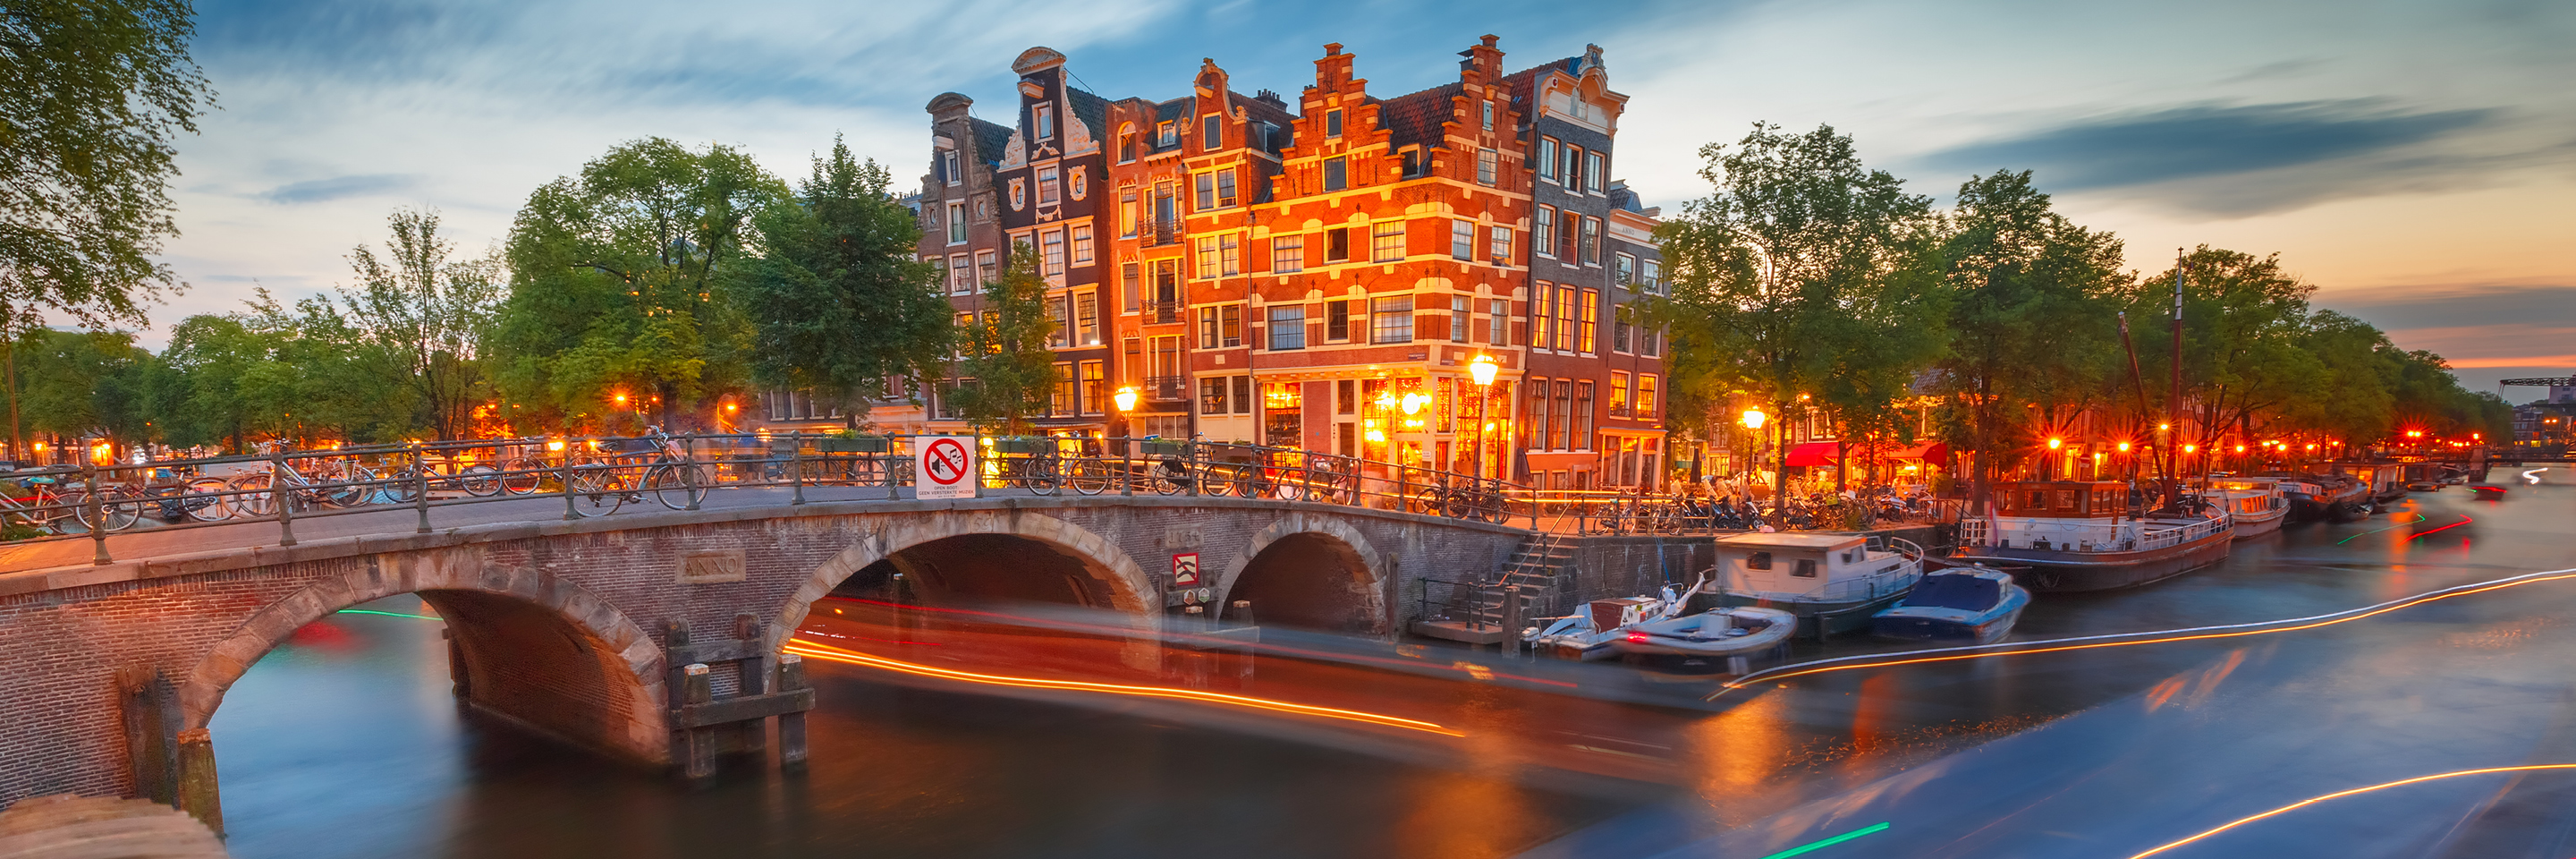 Magnificent Europe with 1 Night in Amsterdam